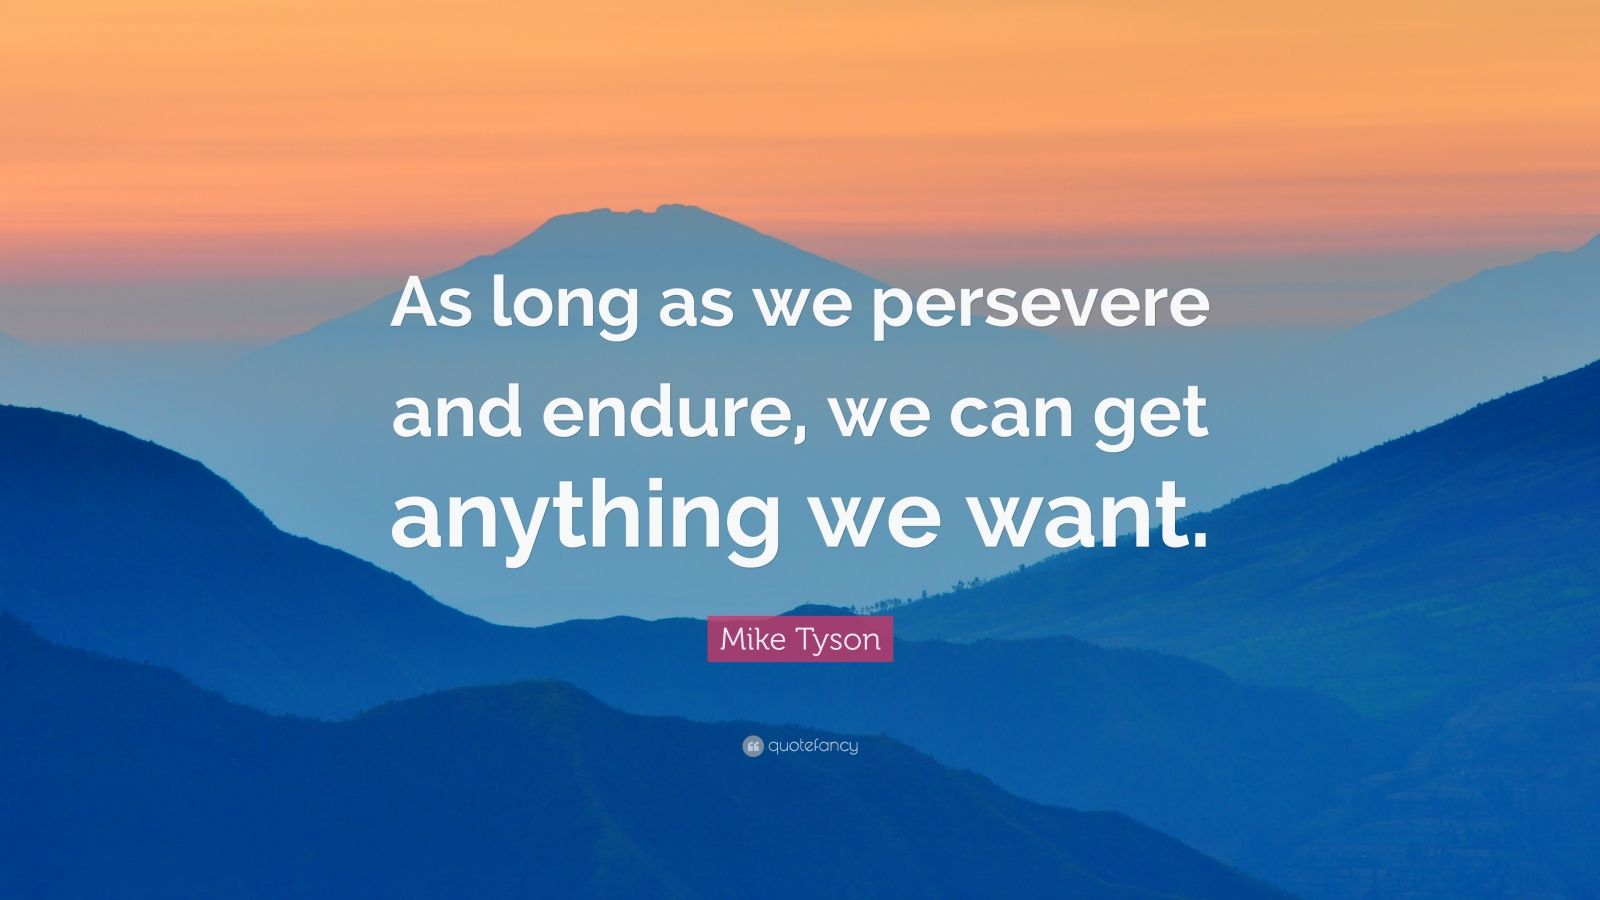 Mike Tyson Quote: “As long as we persevere and endure, we can get ...